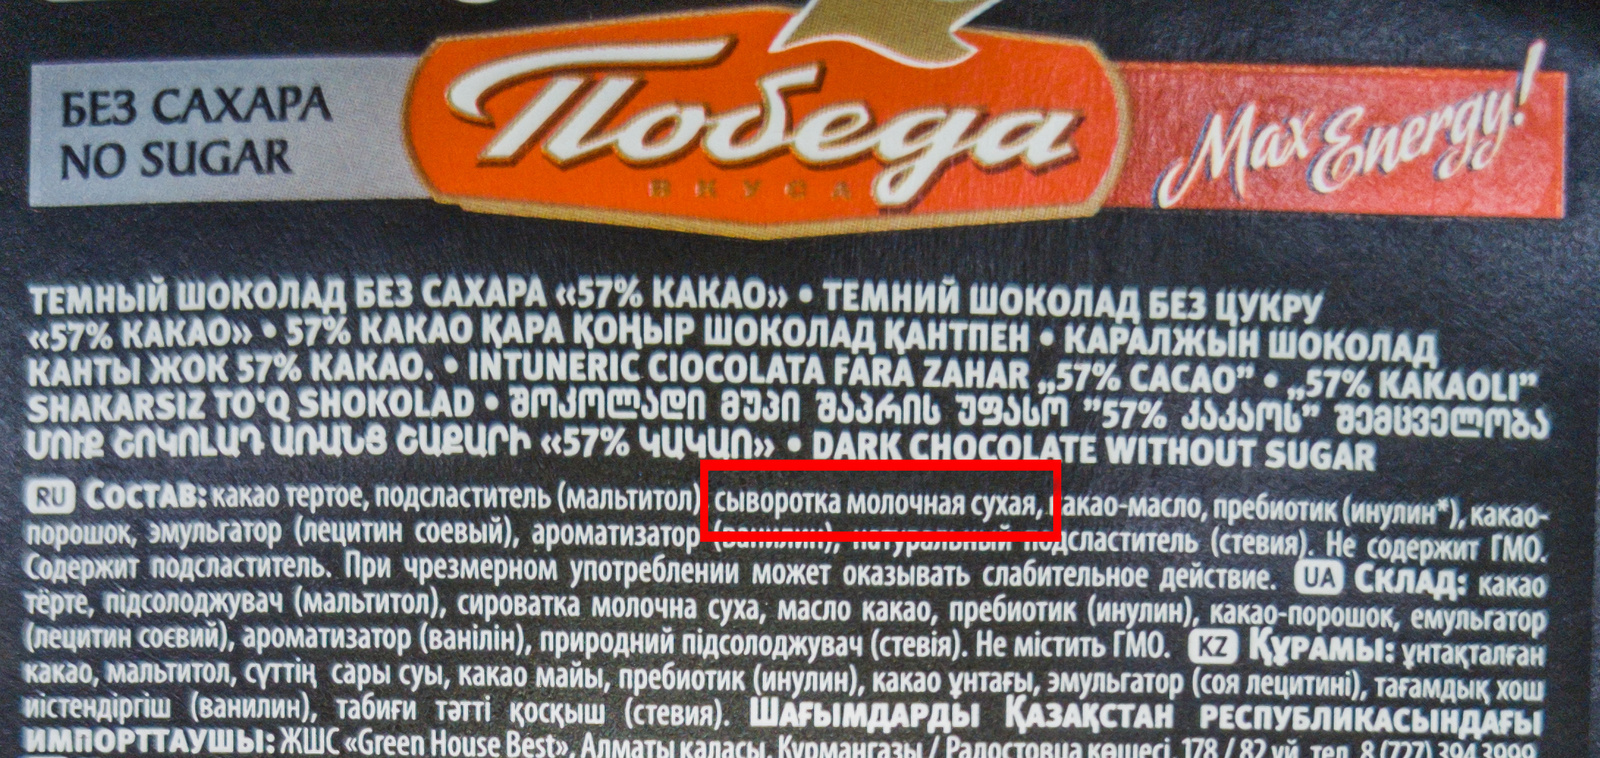 No Sugar... Now Chocolate - My, Chocolate, Smells naebalov, Sugar Free, As always, Deception, Products, Sweets, Longpost